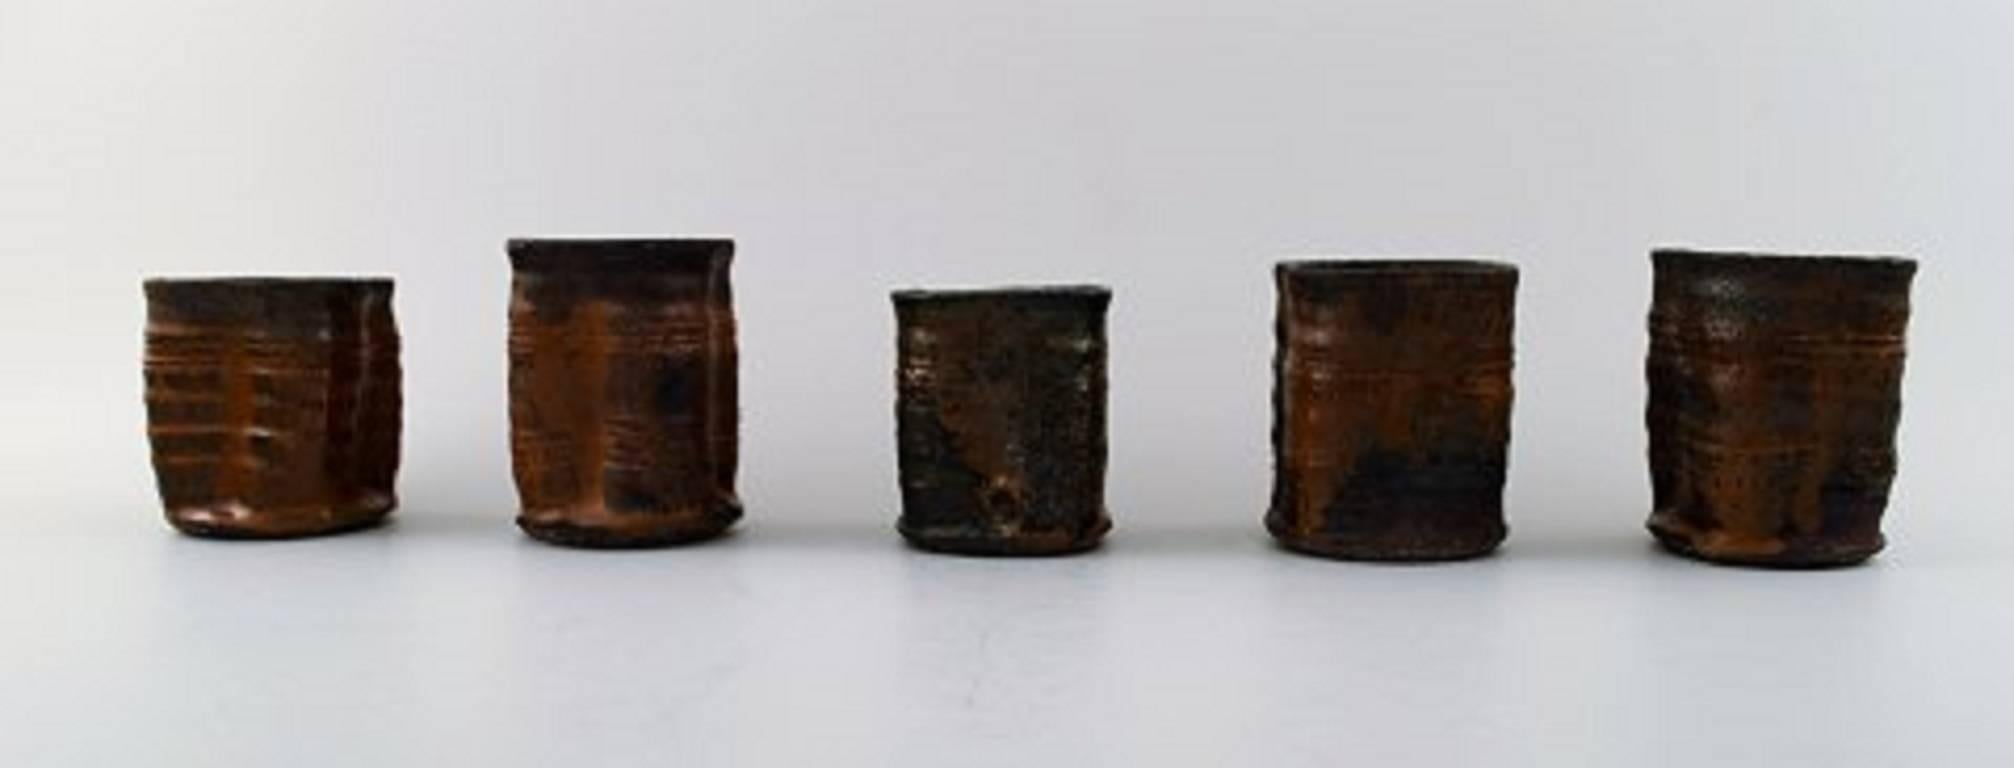 Gutte Eriksen, own workshop, 12 ceramic cups.
1950s.
Stamped.
Measures: 9 x 7 cm.
In perfect condition.